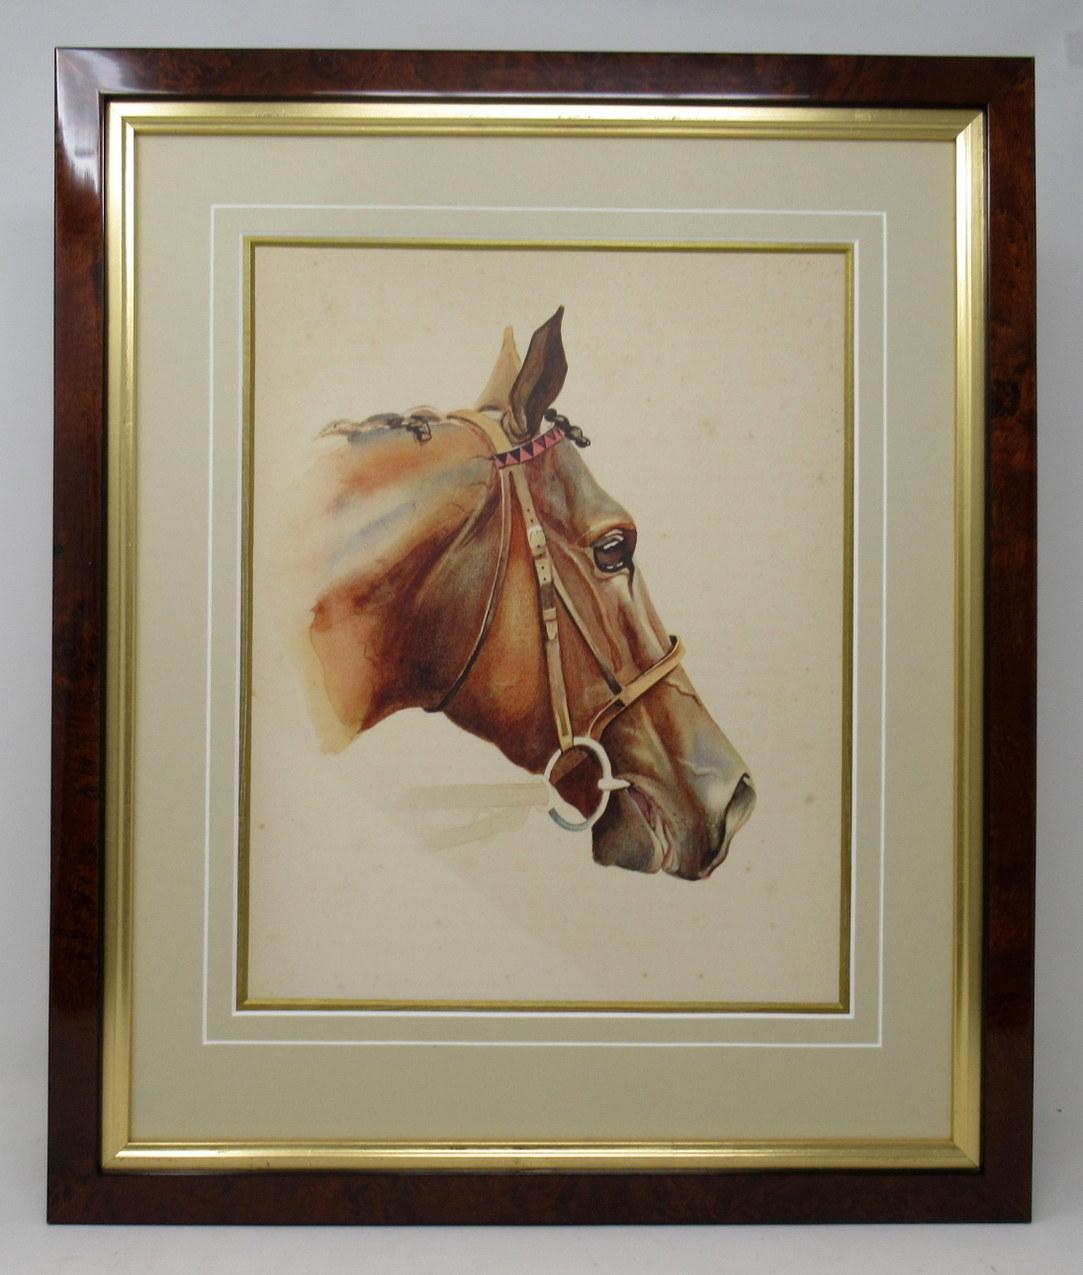 Edwardian Antique Equine Racehorse Painting Sir Gallahad French Thoroughbred Horse Racing